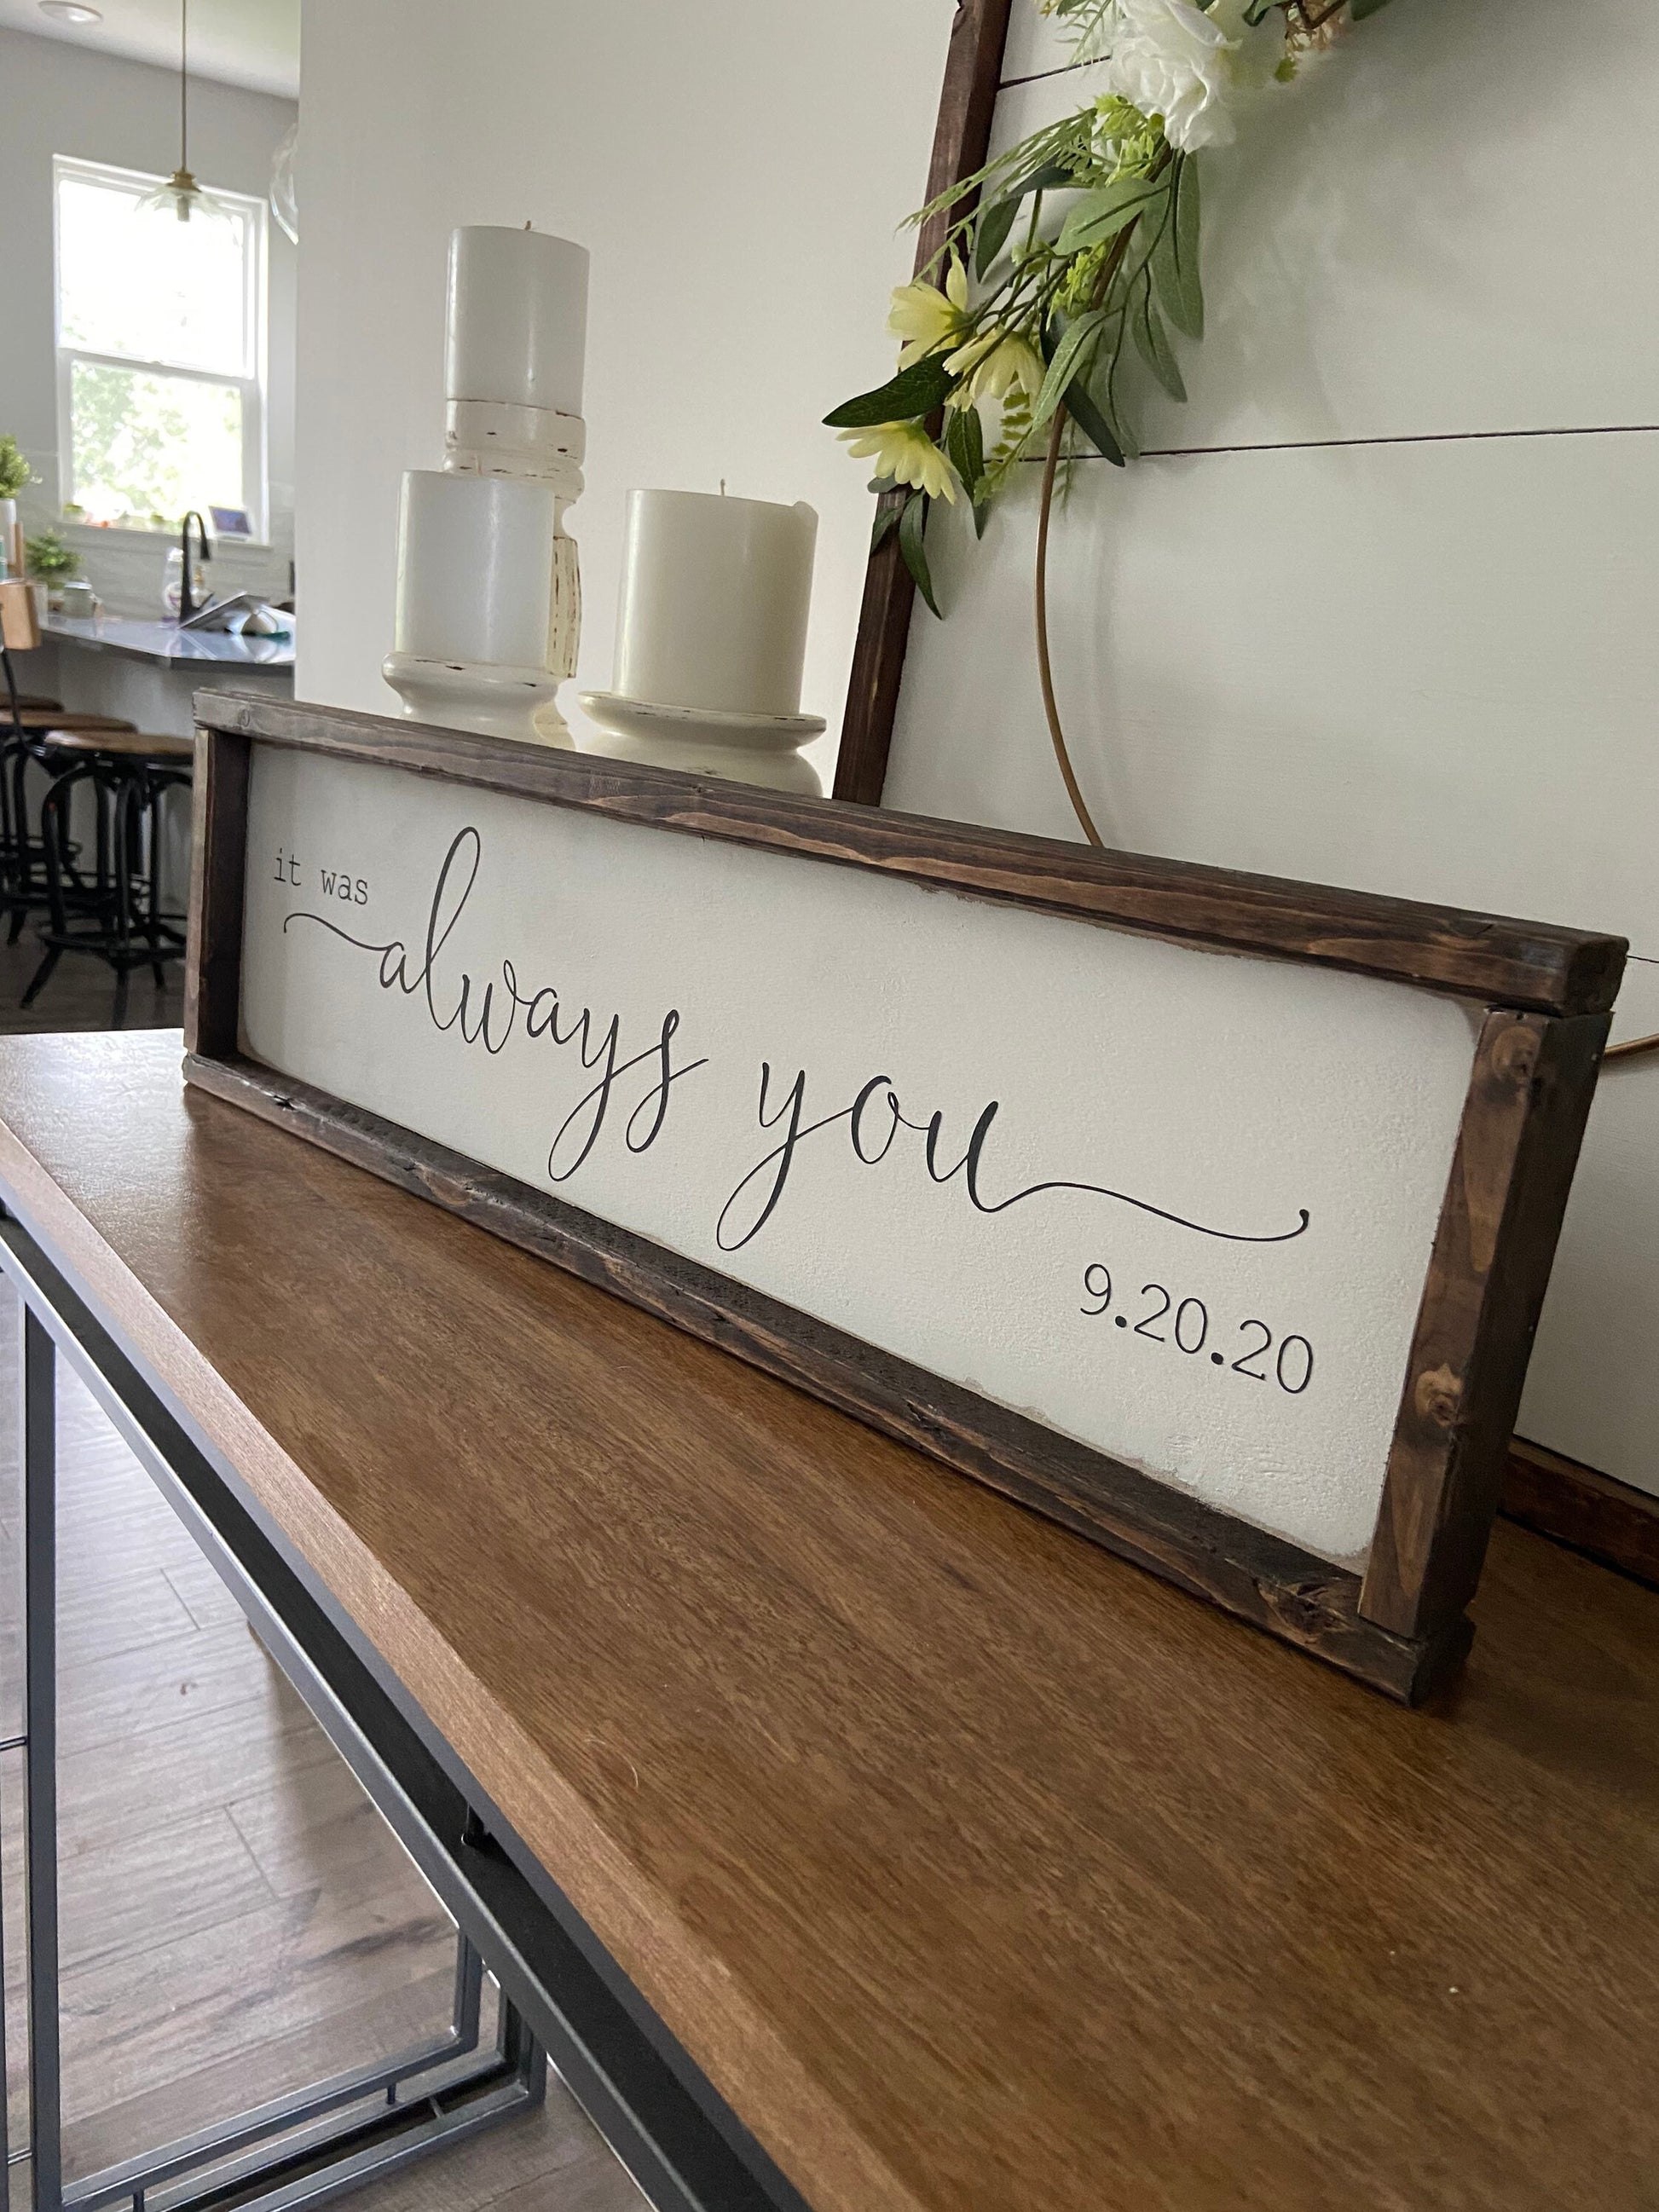 it was always you - - above over the bed sign - master bedroom wall art - personalized wedding gift [FREE SHIPPING!]